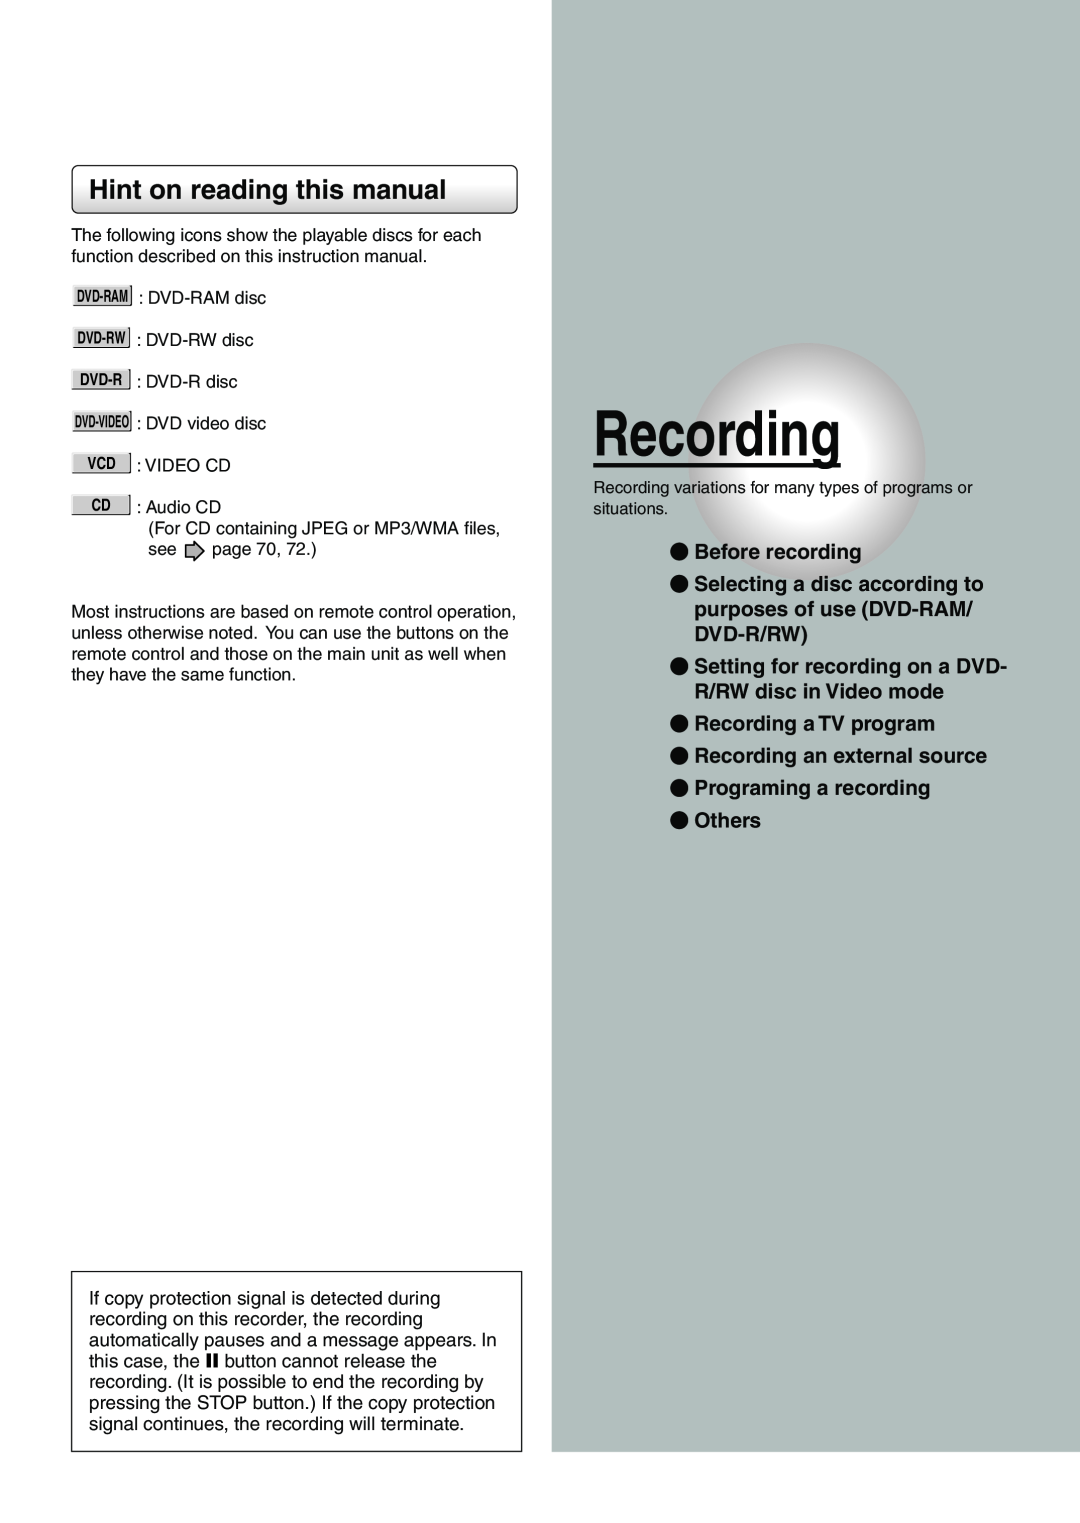 Toshiba D-R4SU Hint on reading this manual, Before recording, Recording a TV program, Recording an external source 